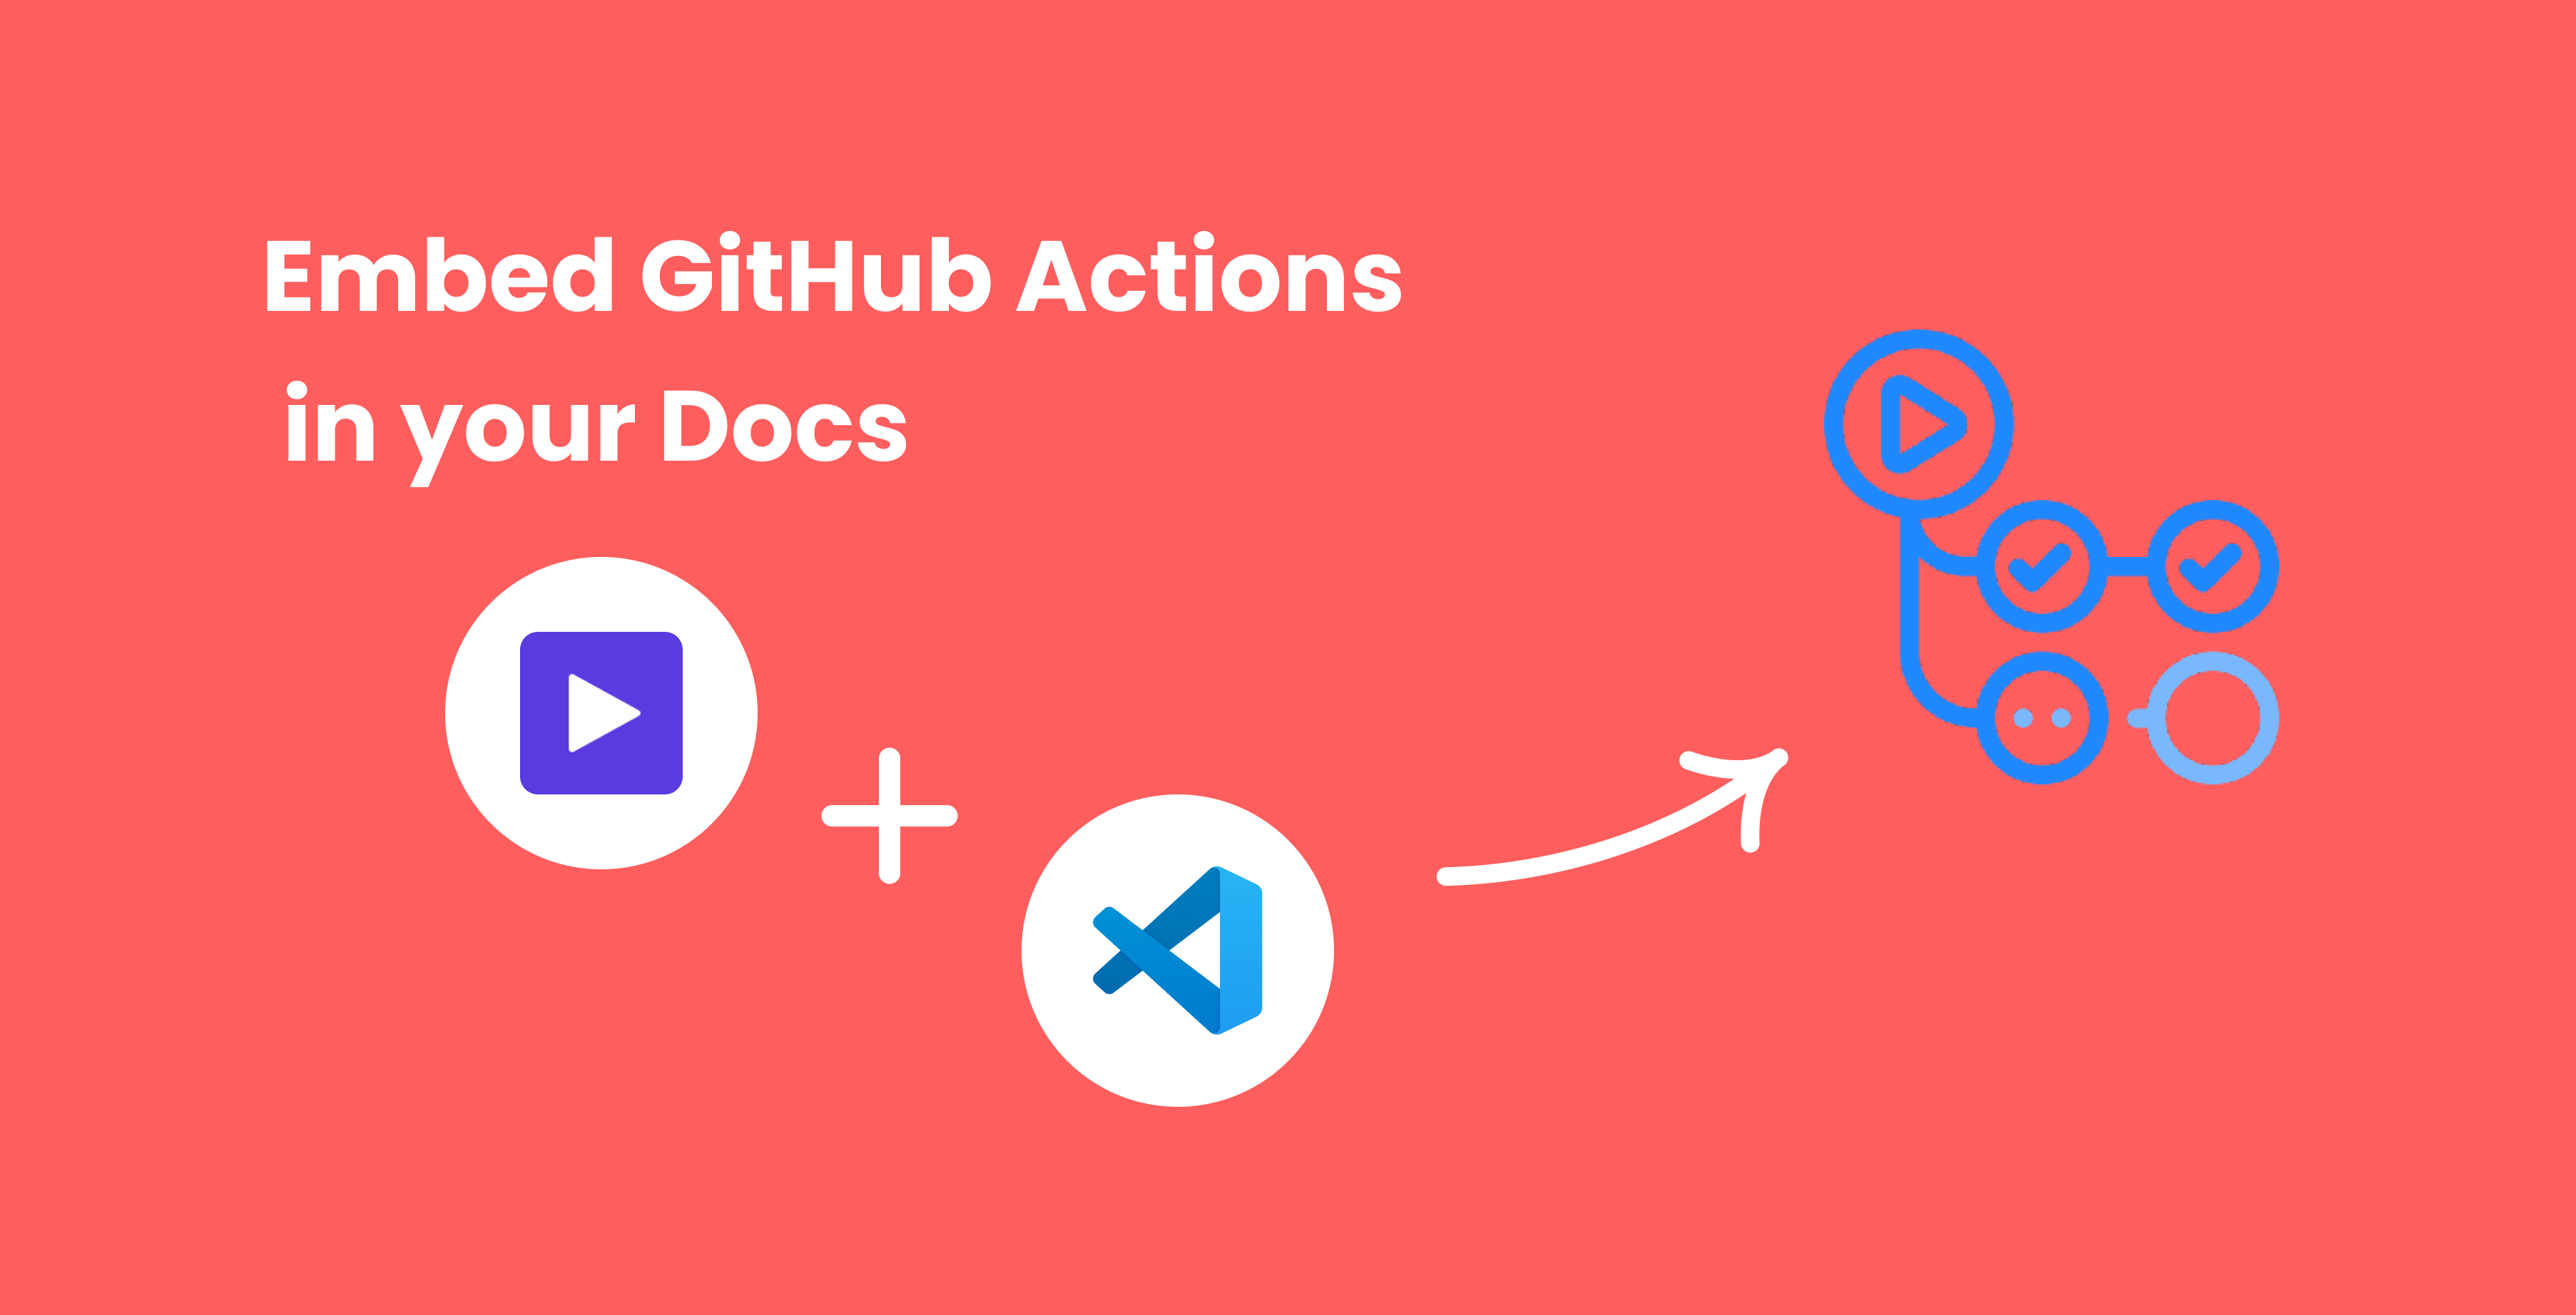 Embed GitHub Actions in your Docs